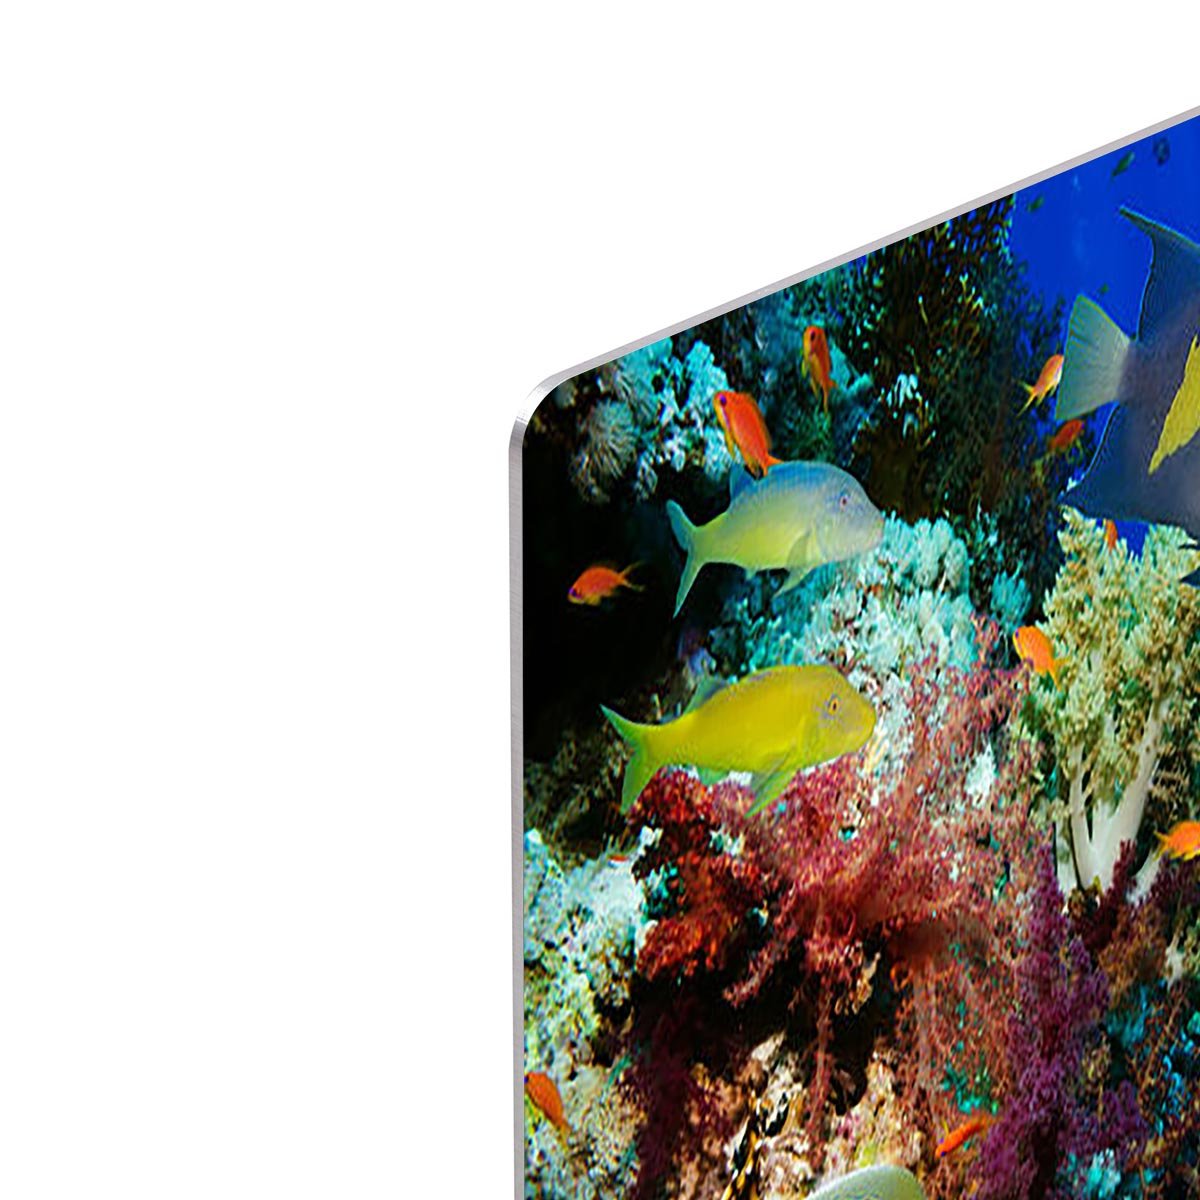 Tropical Anthias fish with net fire corals and shark on Red Sea reef HD Metal Print - Canvas Art Rocks - 4